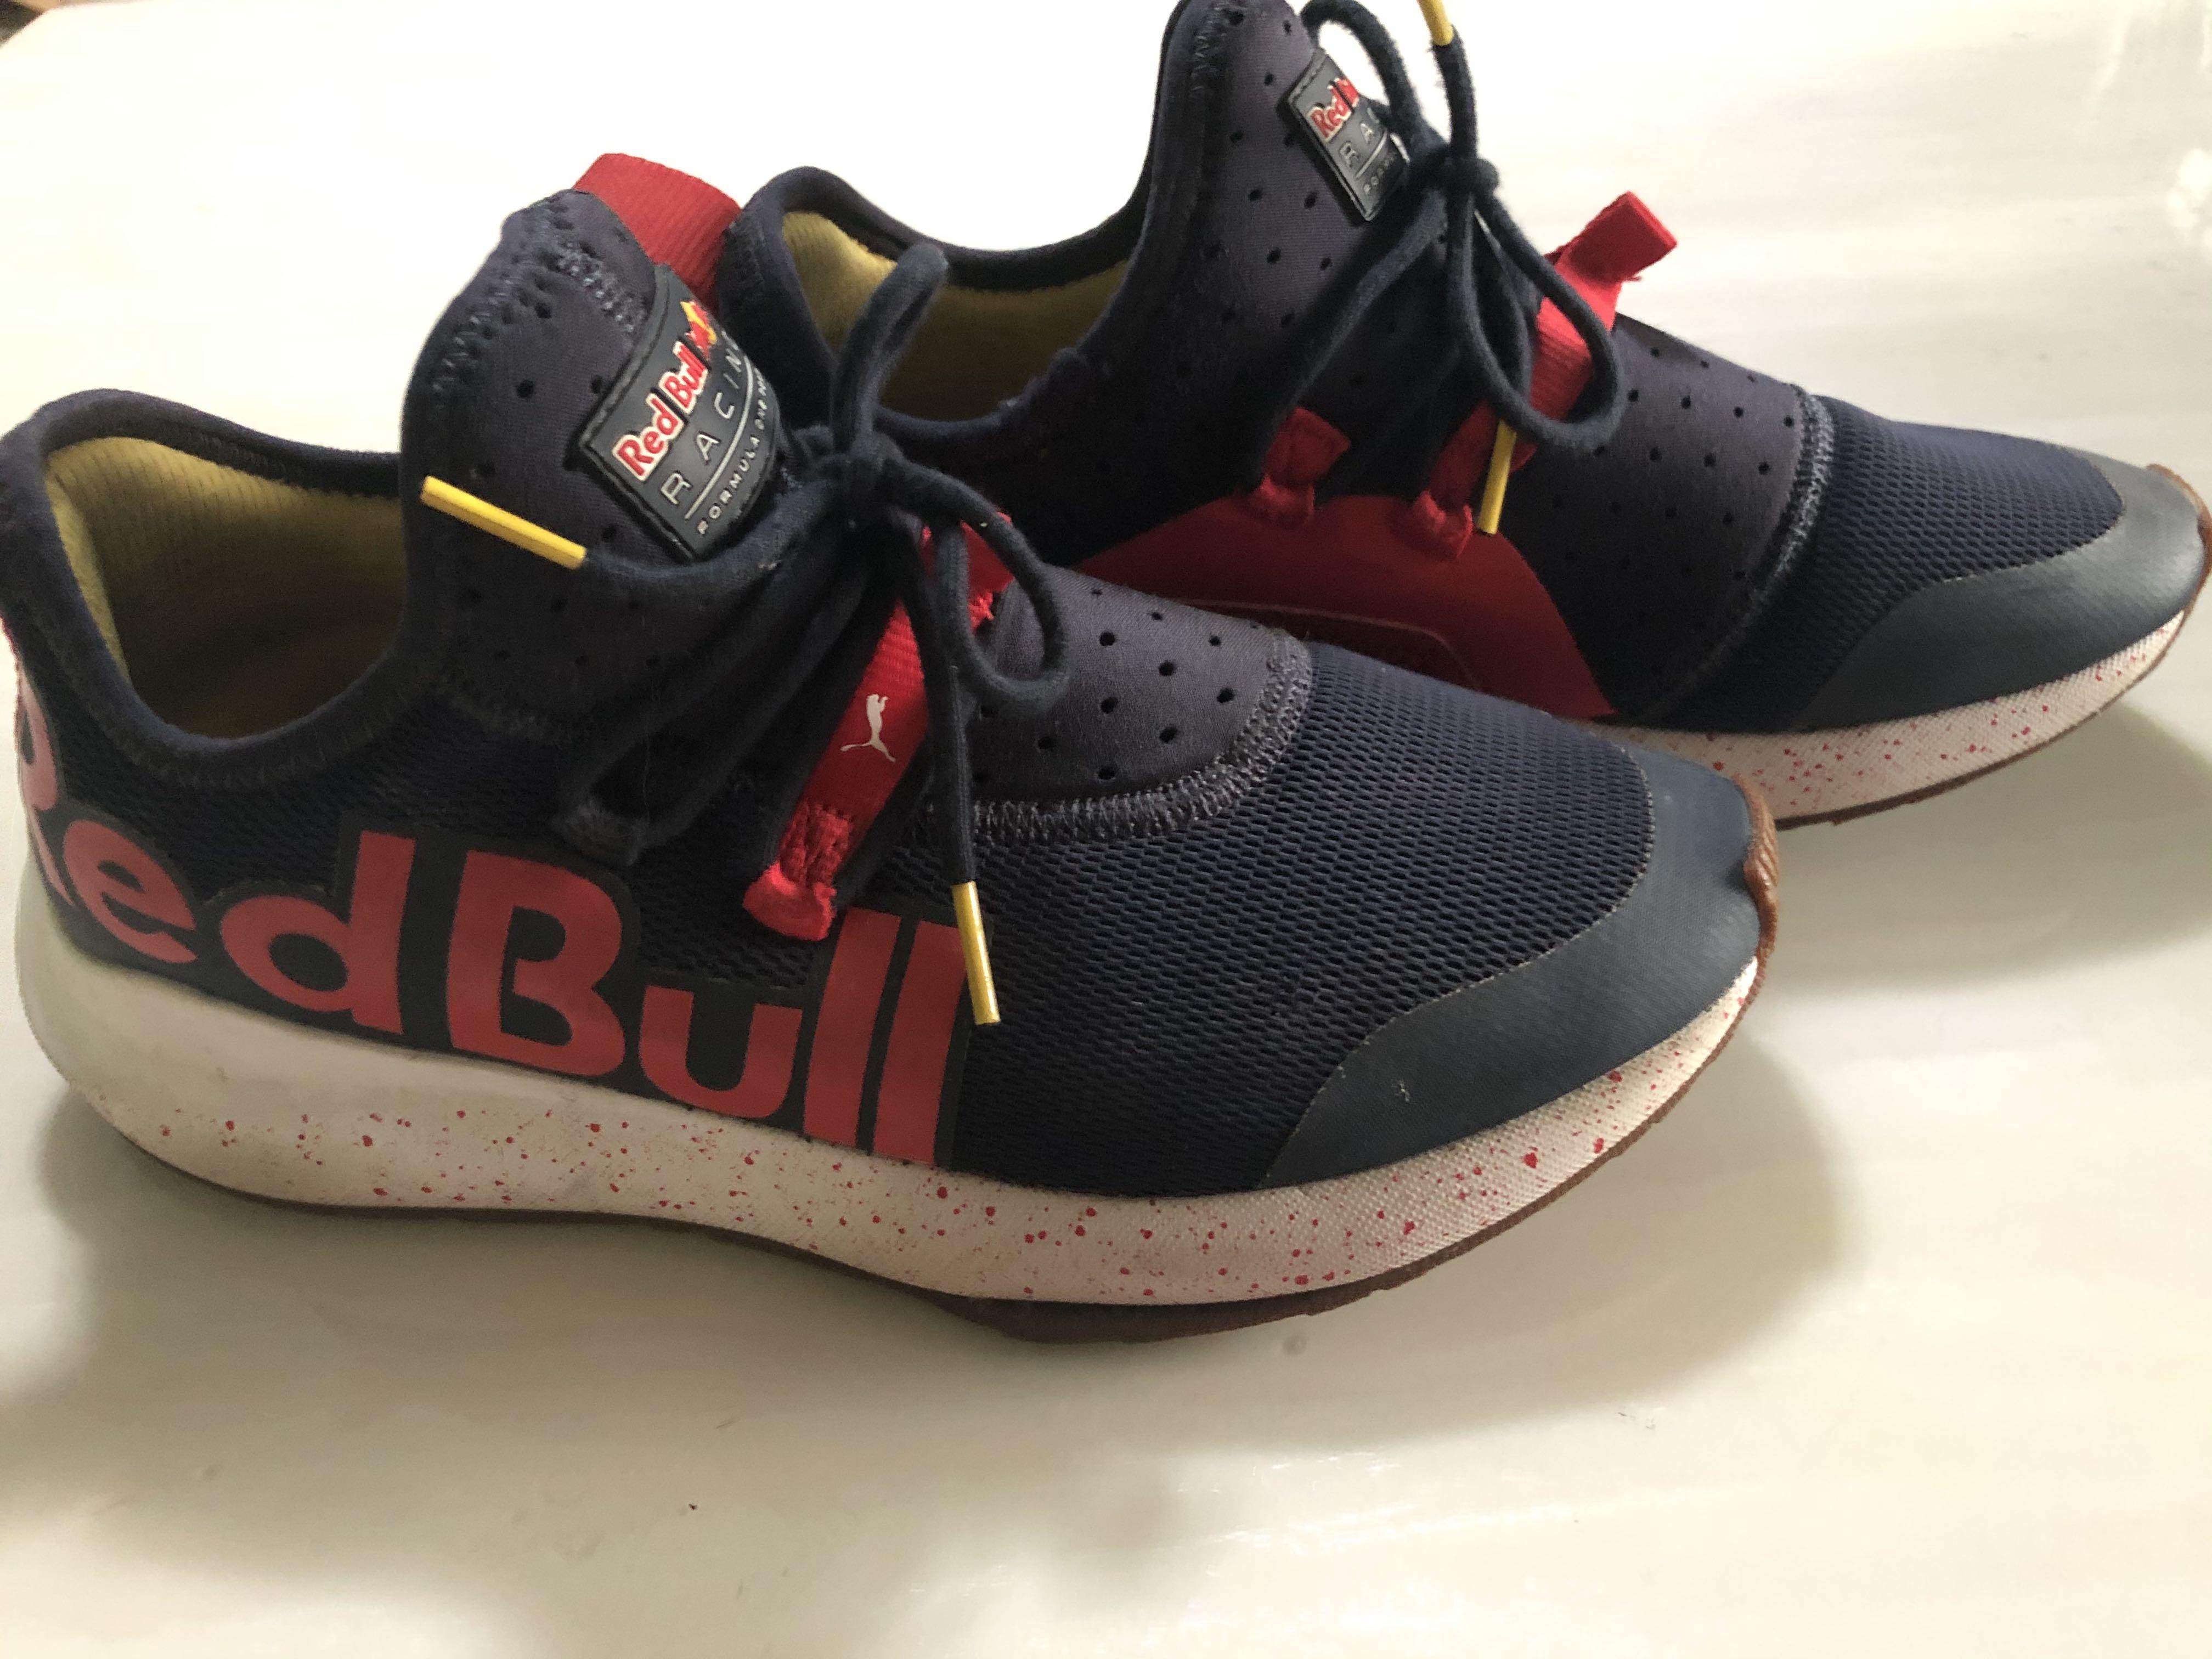 red bull racing shoes